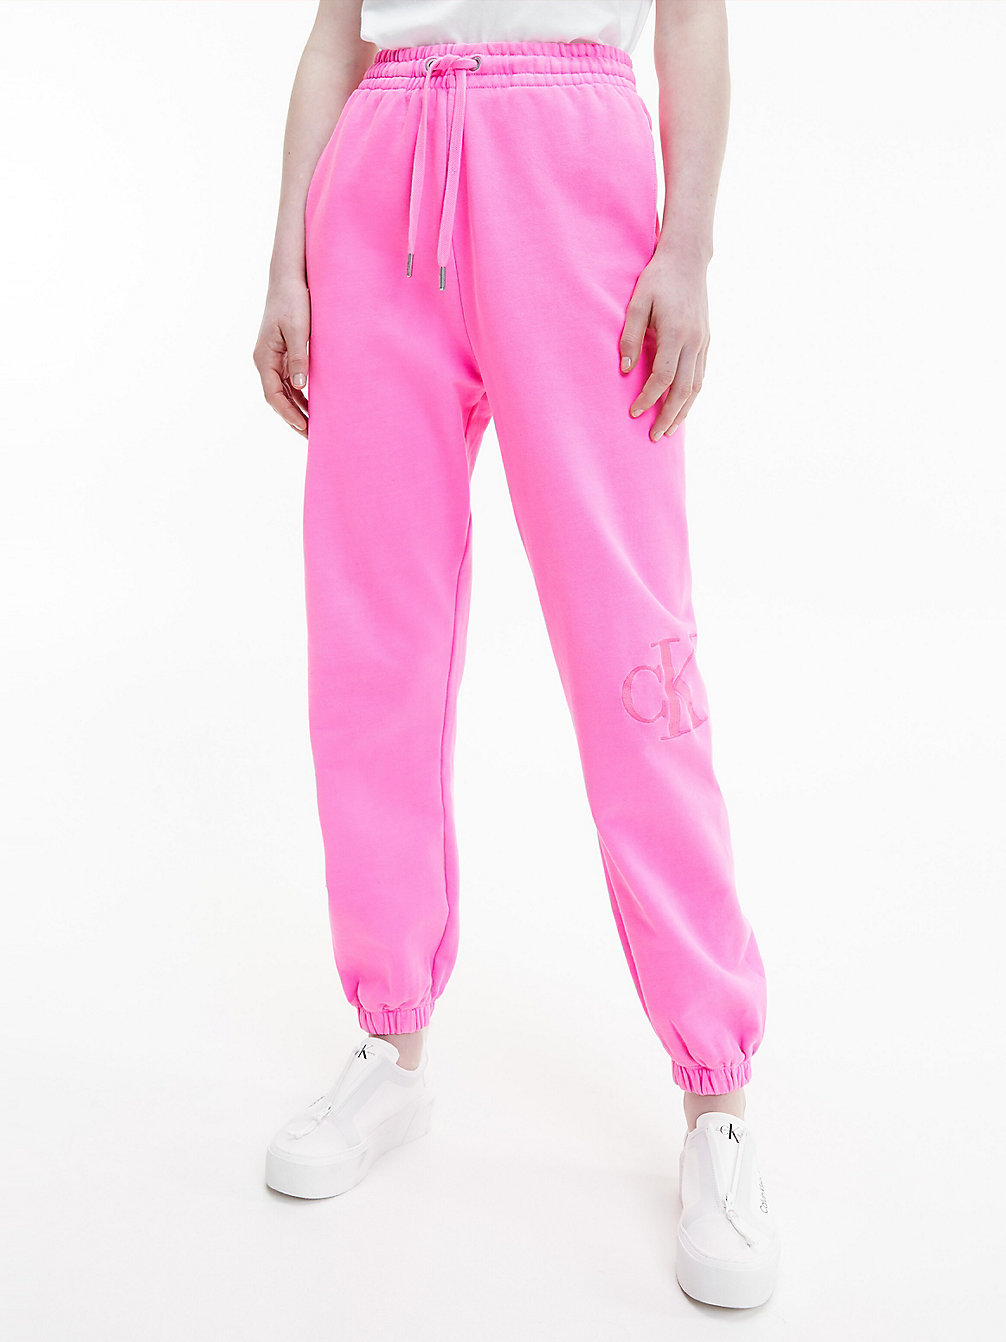 NEON PINK Relaxed Acid Wash Joggers undefined women Calvin Klein